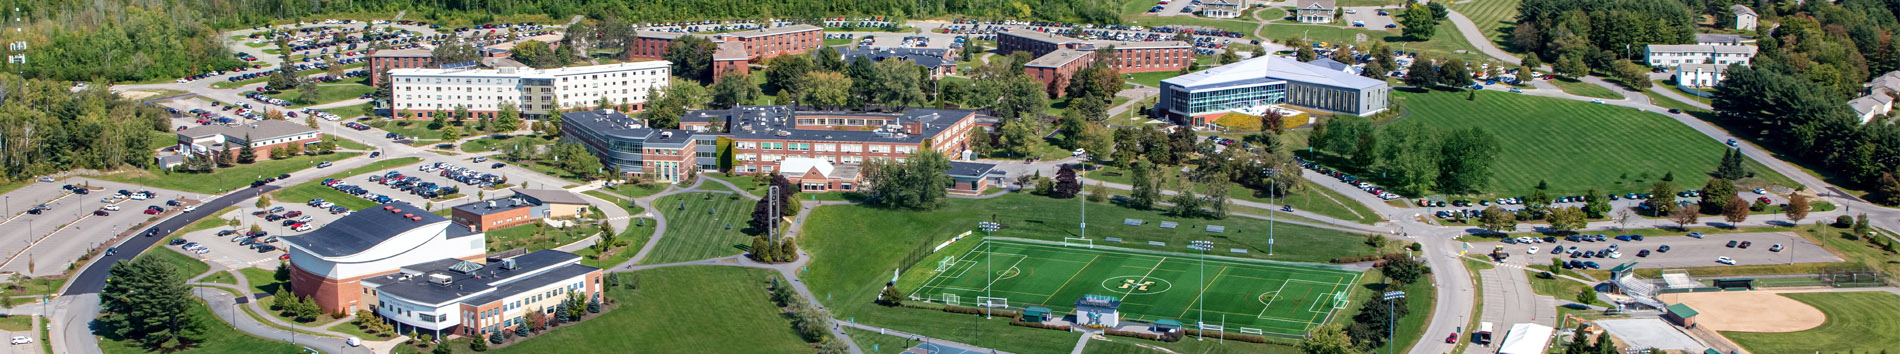 Aerial view of the Husson University campus in Bangor.